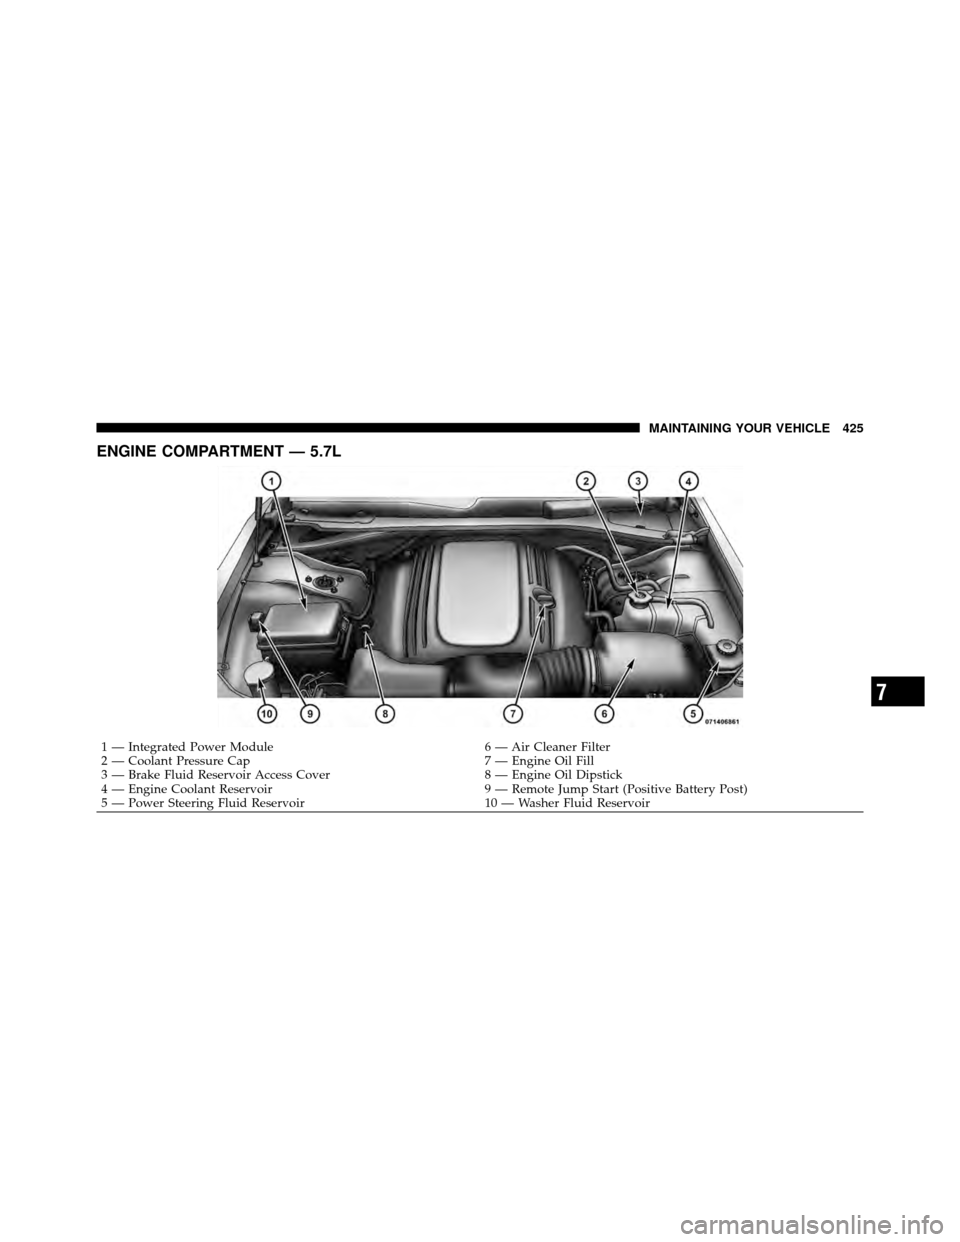 CHRYSLER 300 2010 1.G Owners Manual ENGINE COMPARTMENT — 5.7L
1 — Integrated Power Module6 — Air Cleaner Filter
2 — Coolant Pressure Cap 7 — Engine Oil Fill
3 — Brake Fluid Reservoir Access Cover 8 — Engine Oil Dipstick
4 